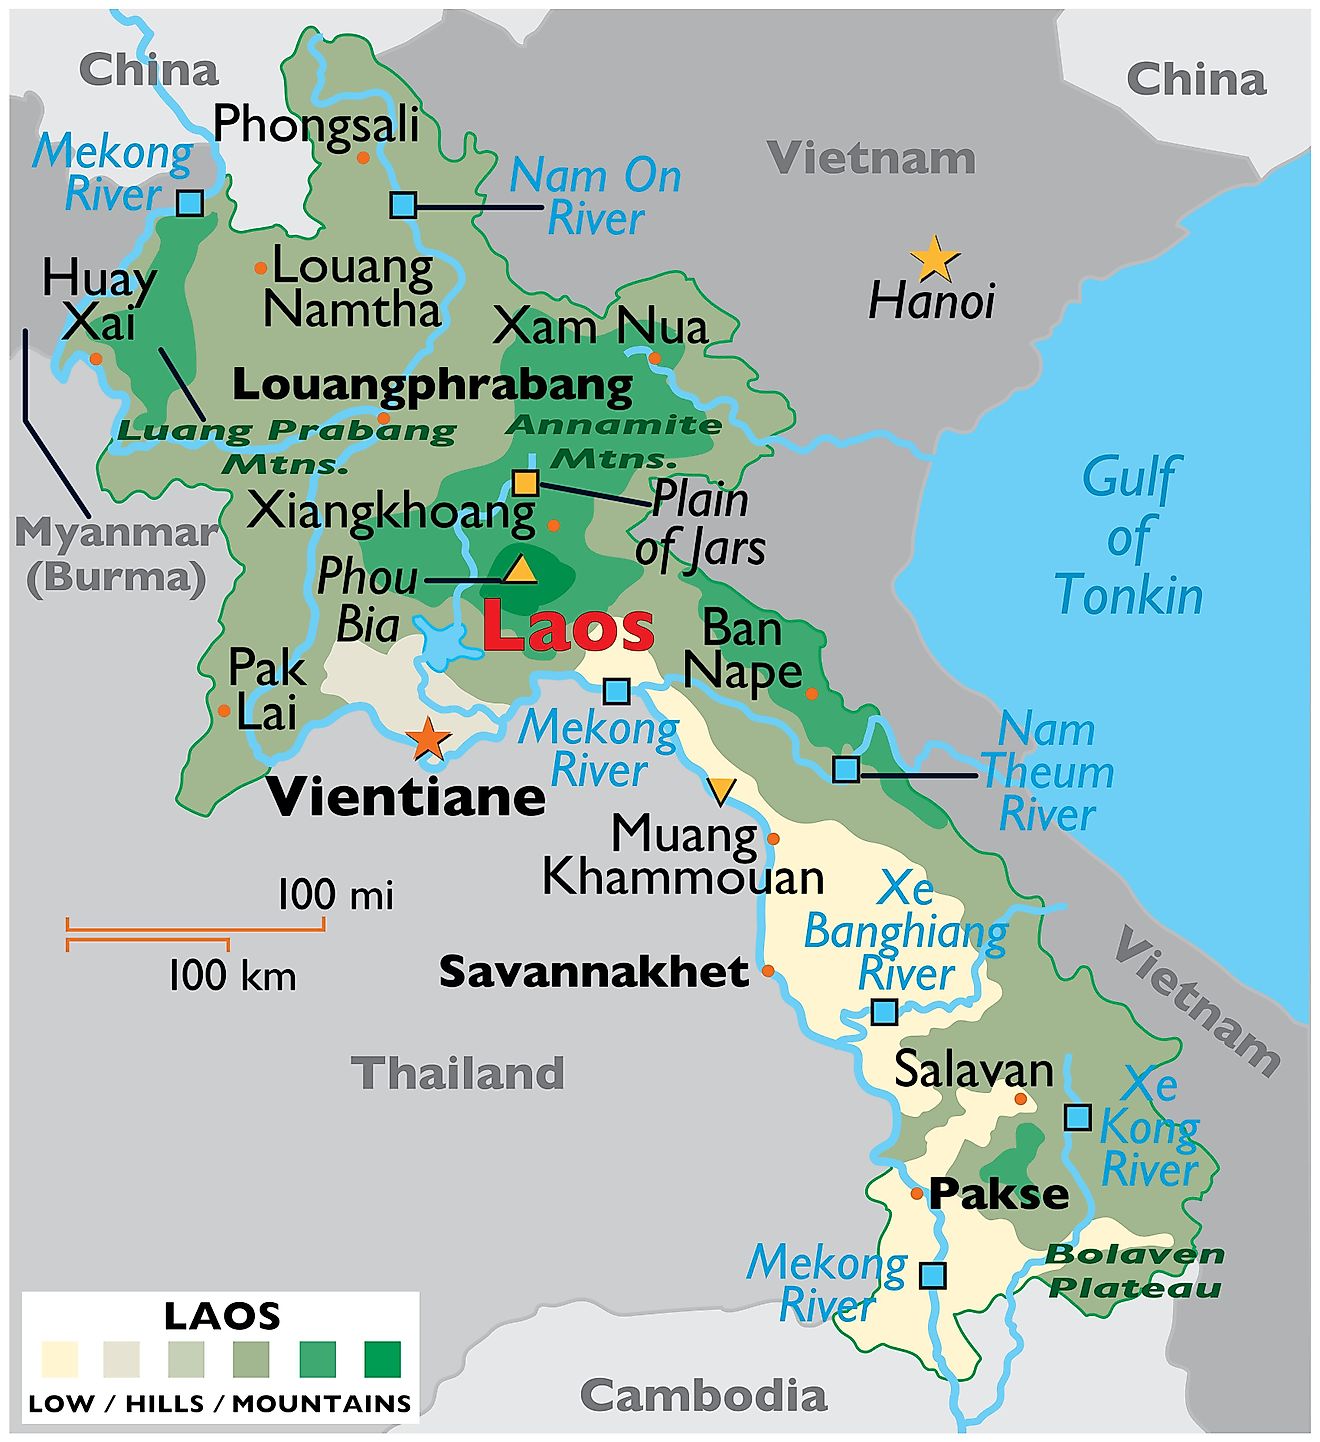 Physical Map of Laos showing international boundaries, relief, highest point, important cities, important rivers, etc.